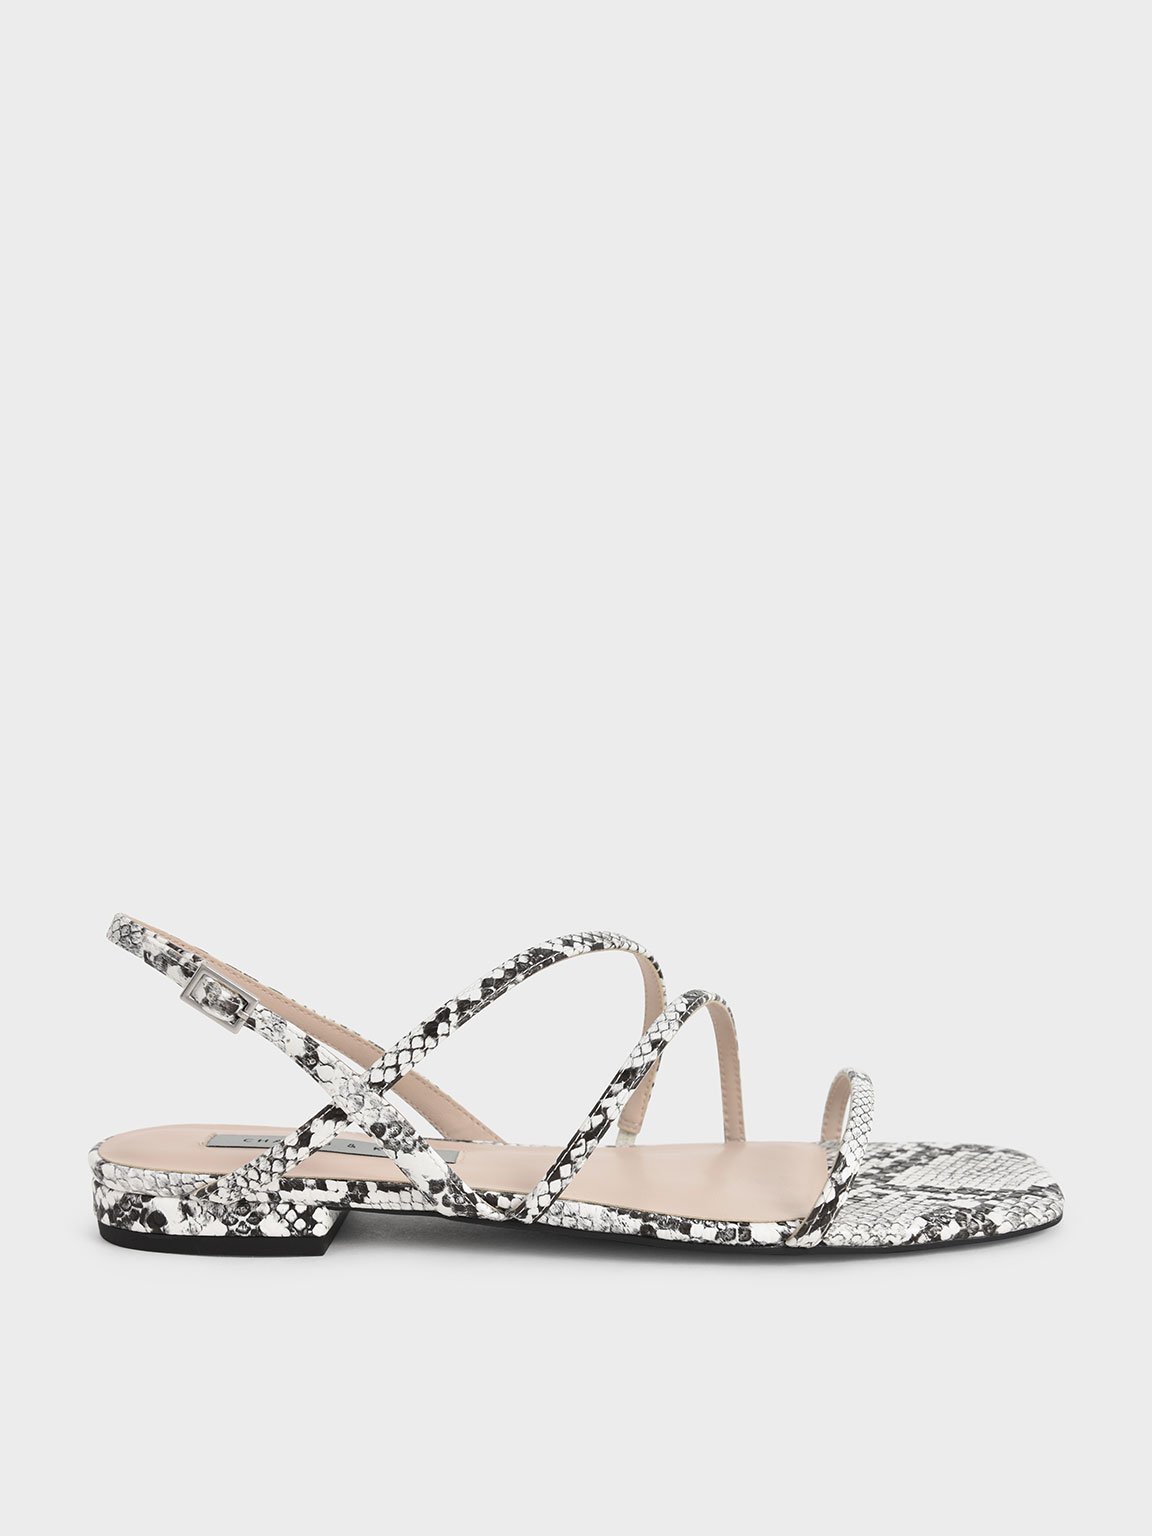 White Snake Print Strappy Slingback Sandals - CHARLES & KEITH ID